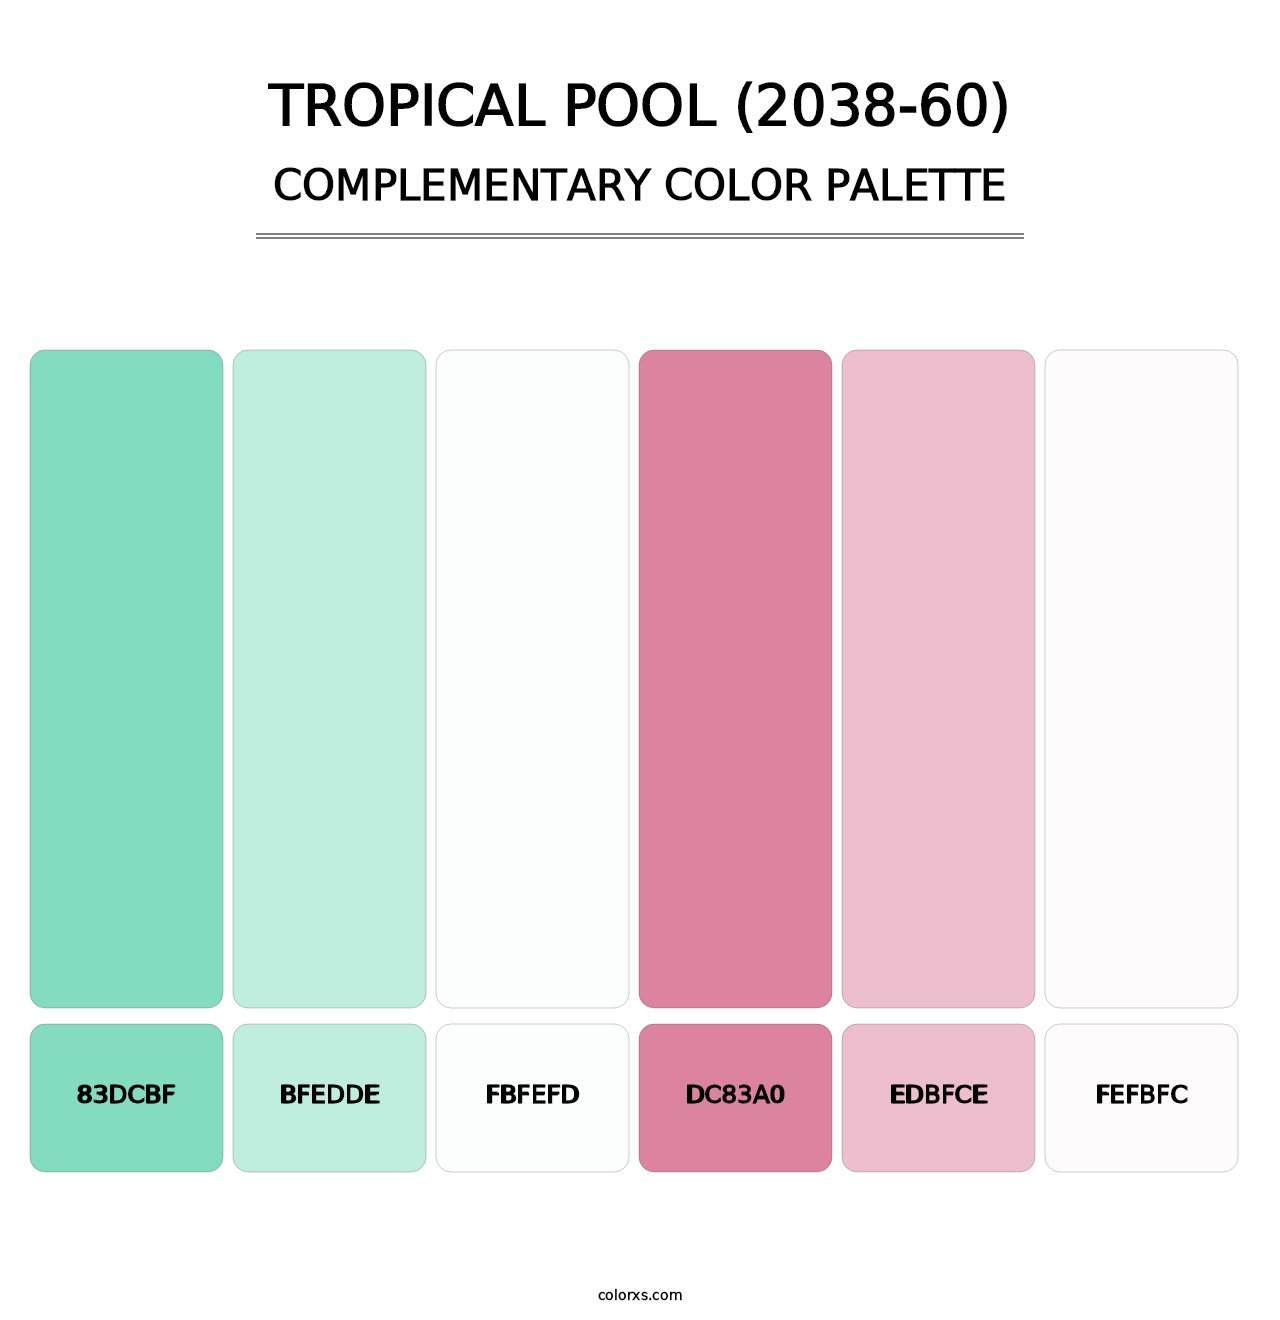 Tropical Pool (2038-60) - Complementary Color Palette